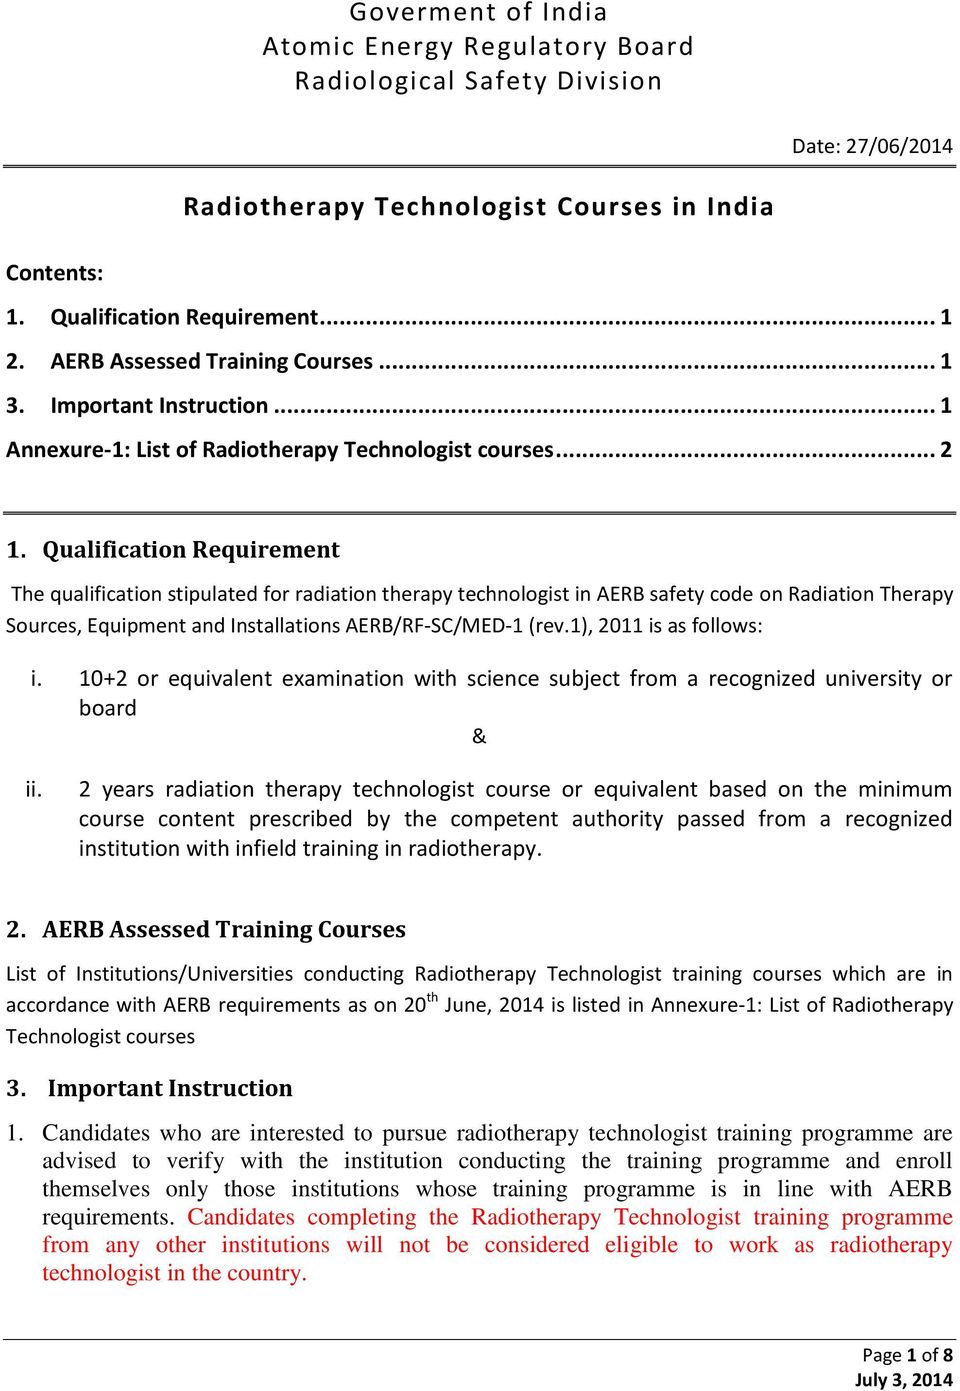 Qualification Requirement The qualification stipulated for radiation therapy technologist in AERB safety code on Radiation Therapy Sources, Equipment and Installations AERB/RF-SC/MED-1 (rev.